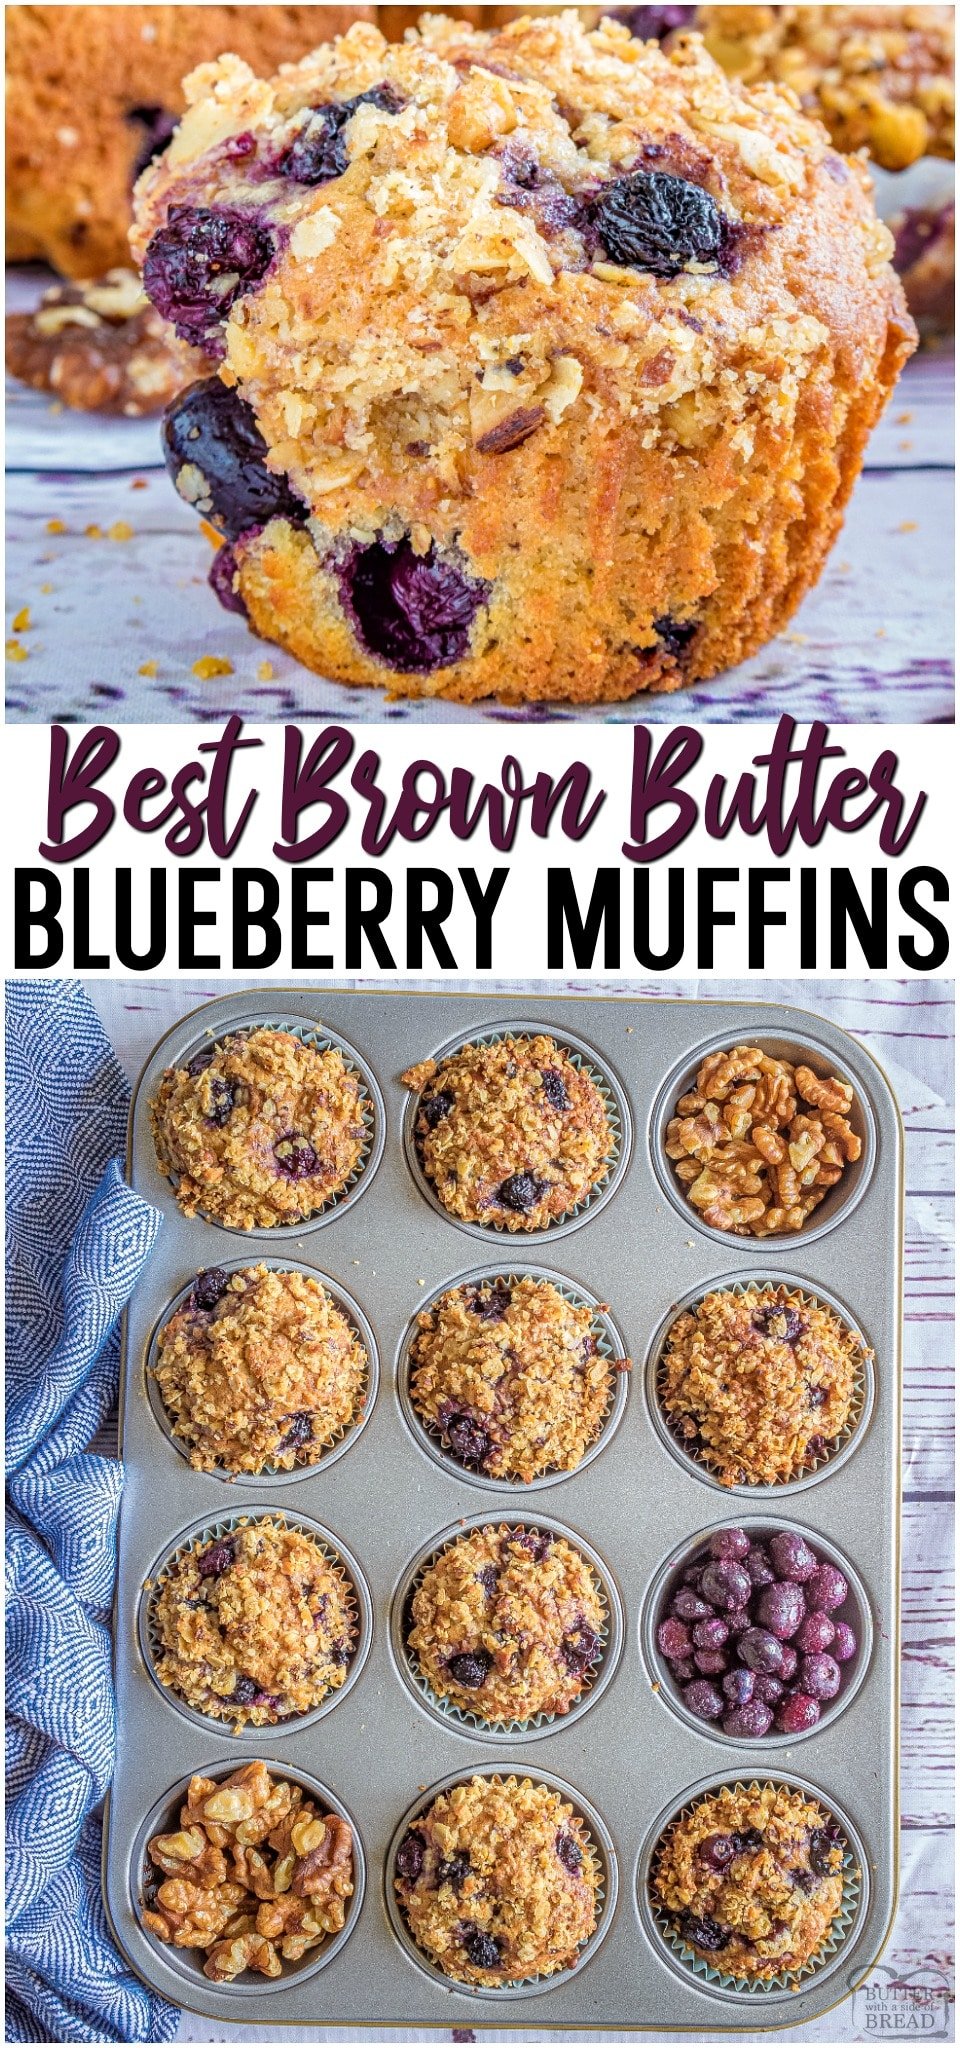 Brown butter blueberry muffins are soft, flavorful muffins topped with a buttery streusel. Homemade Blueberry Muffin recipe that yields soft muffins, bursting with blueberry flavor. #muffins #blueberry #butter #baking #breakfast #recipe from BUTTER WITH A SIDE OF BREAD